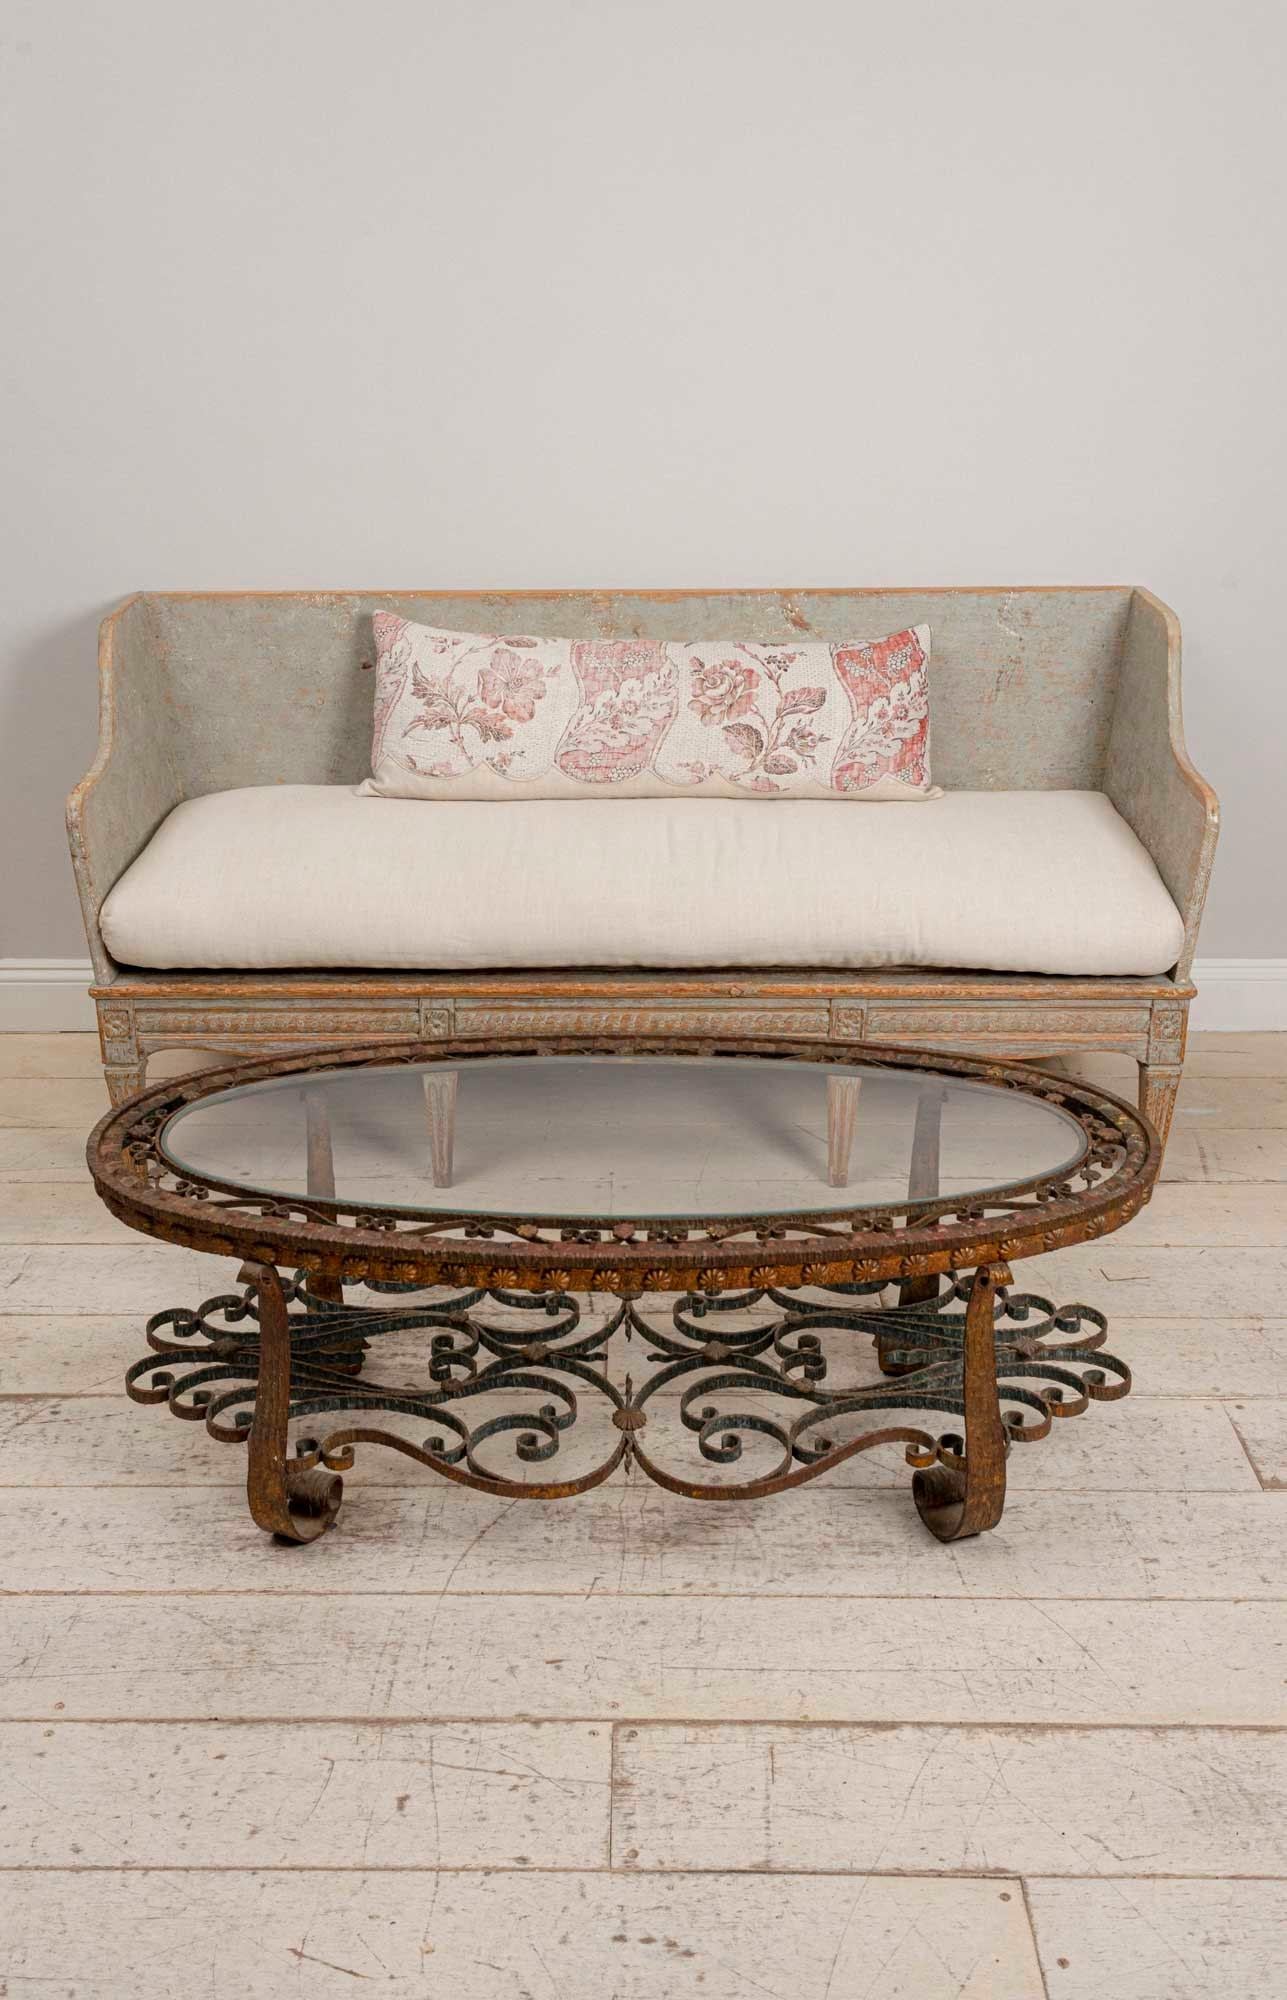 20th Century Spanish Oval Decorative Wrought Iron and Glass Coffee Table, circa 1940s For Sale